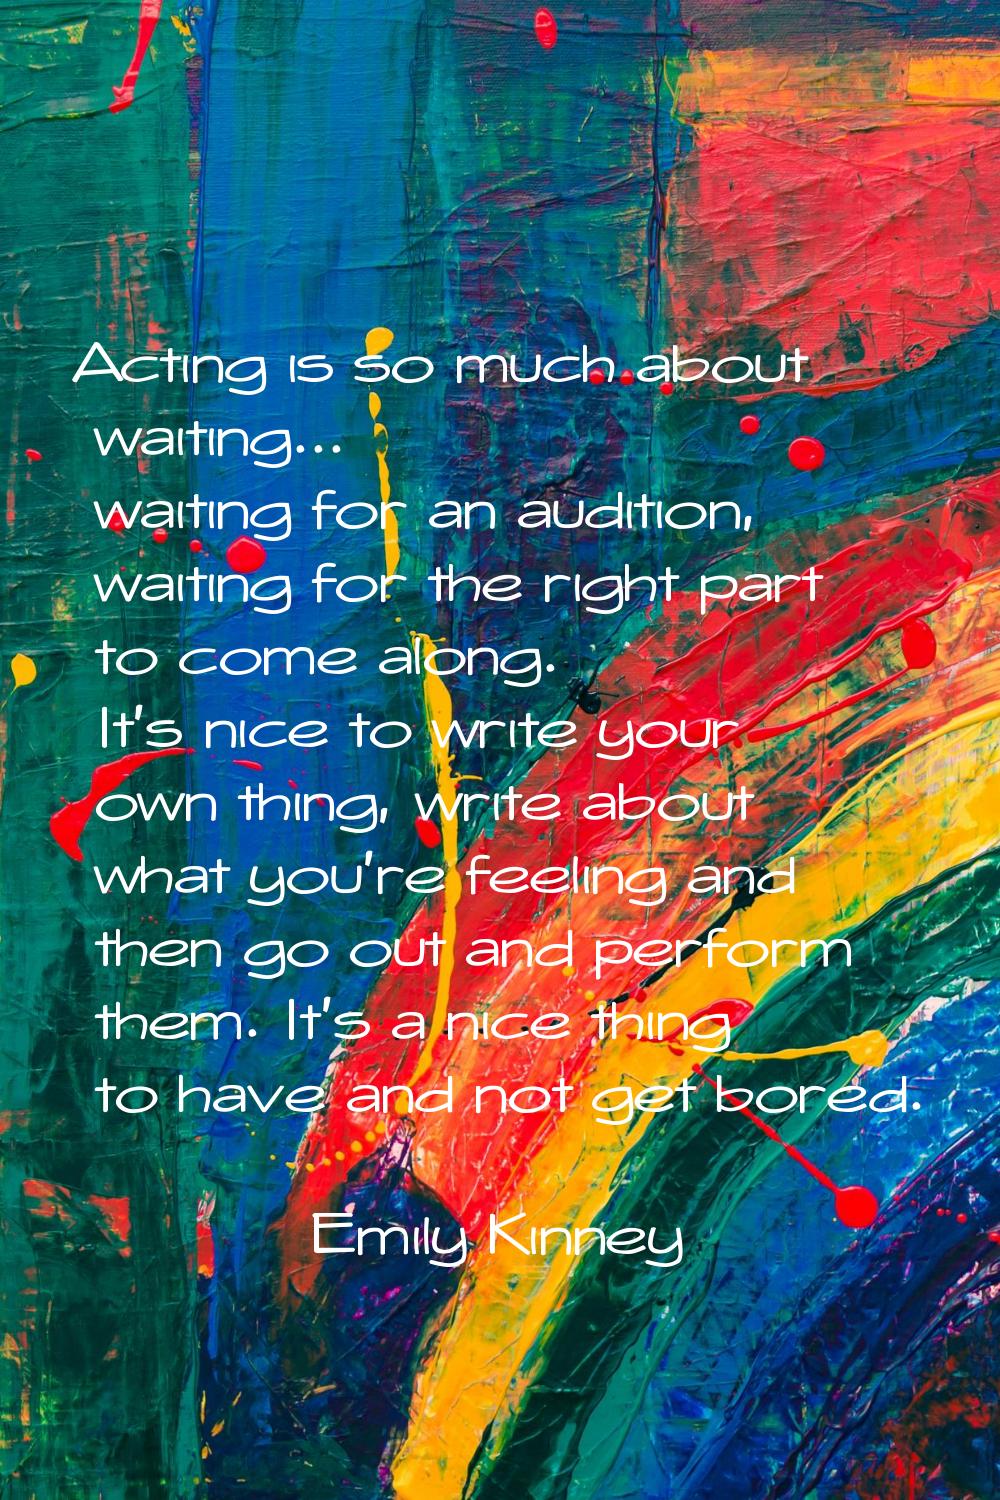 Acting is so much about waiting... waiting for an audition, waiting for the right part to come alon